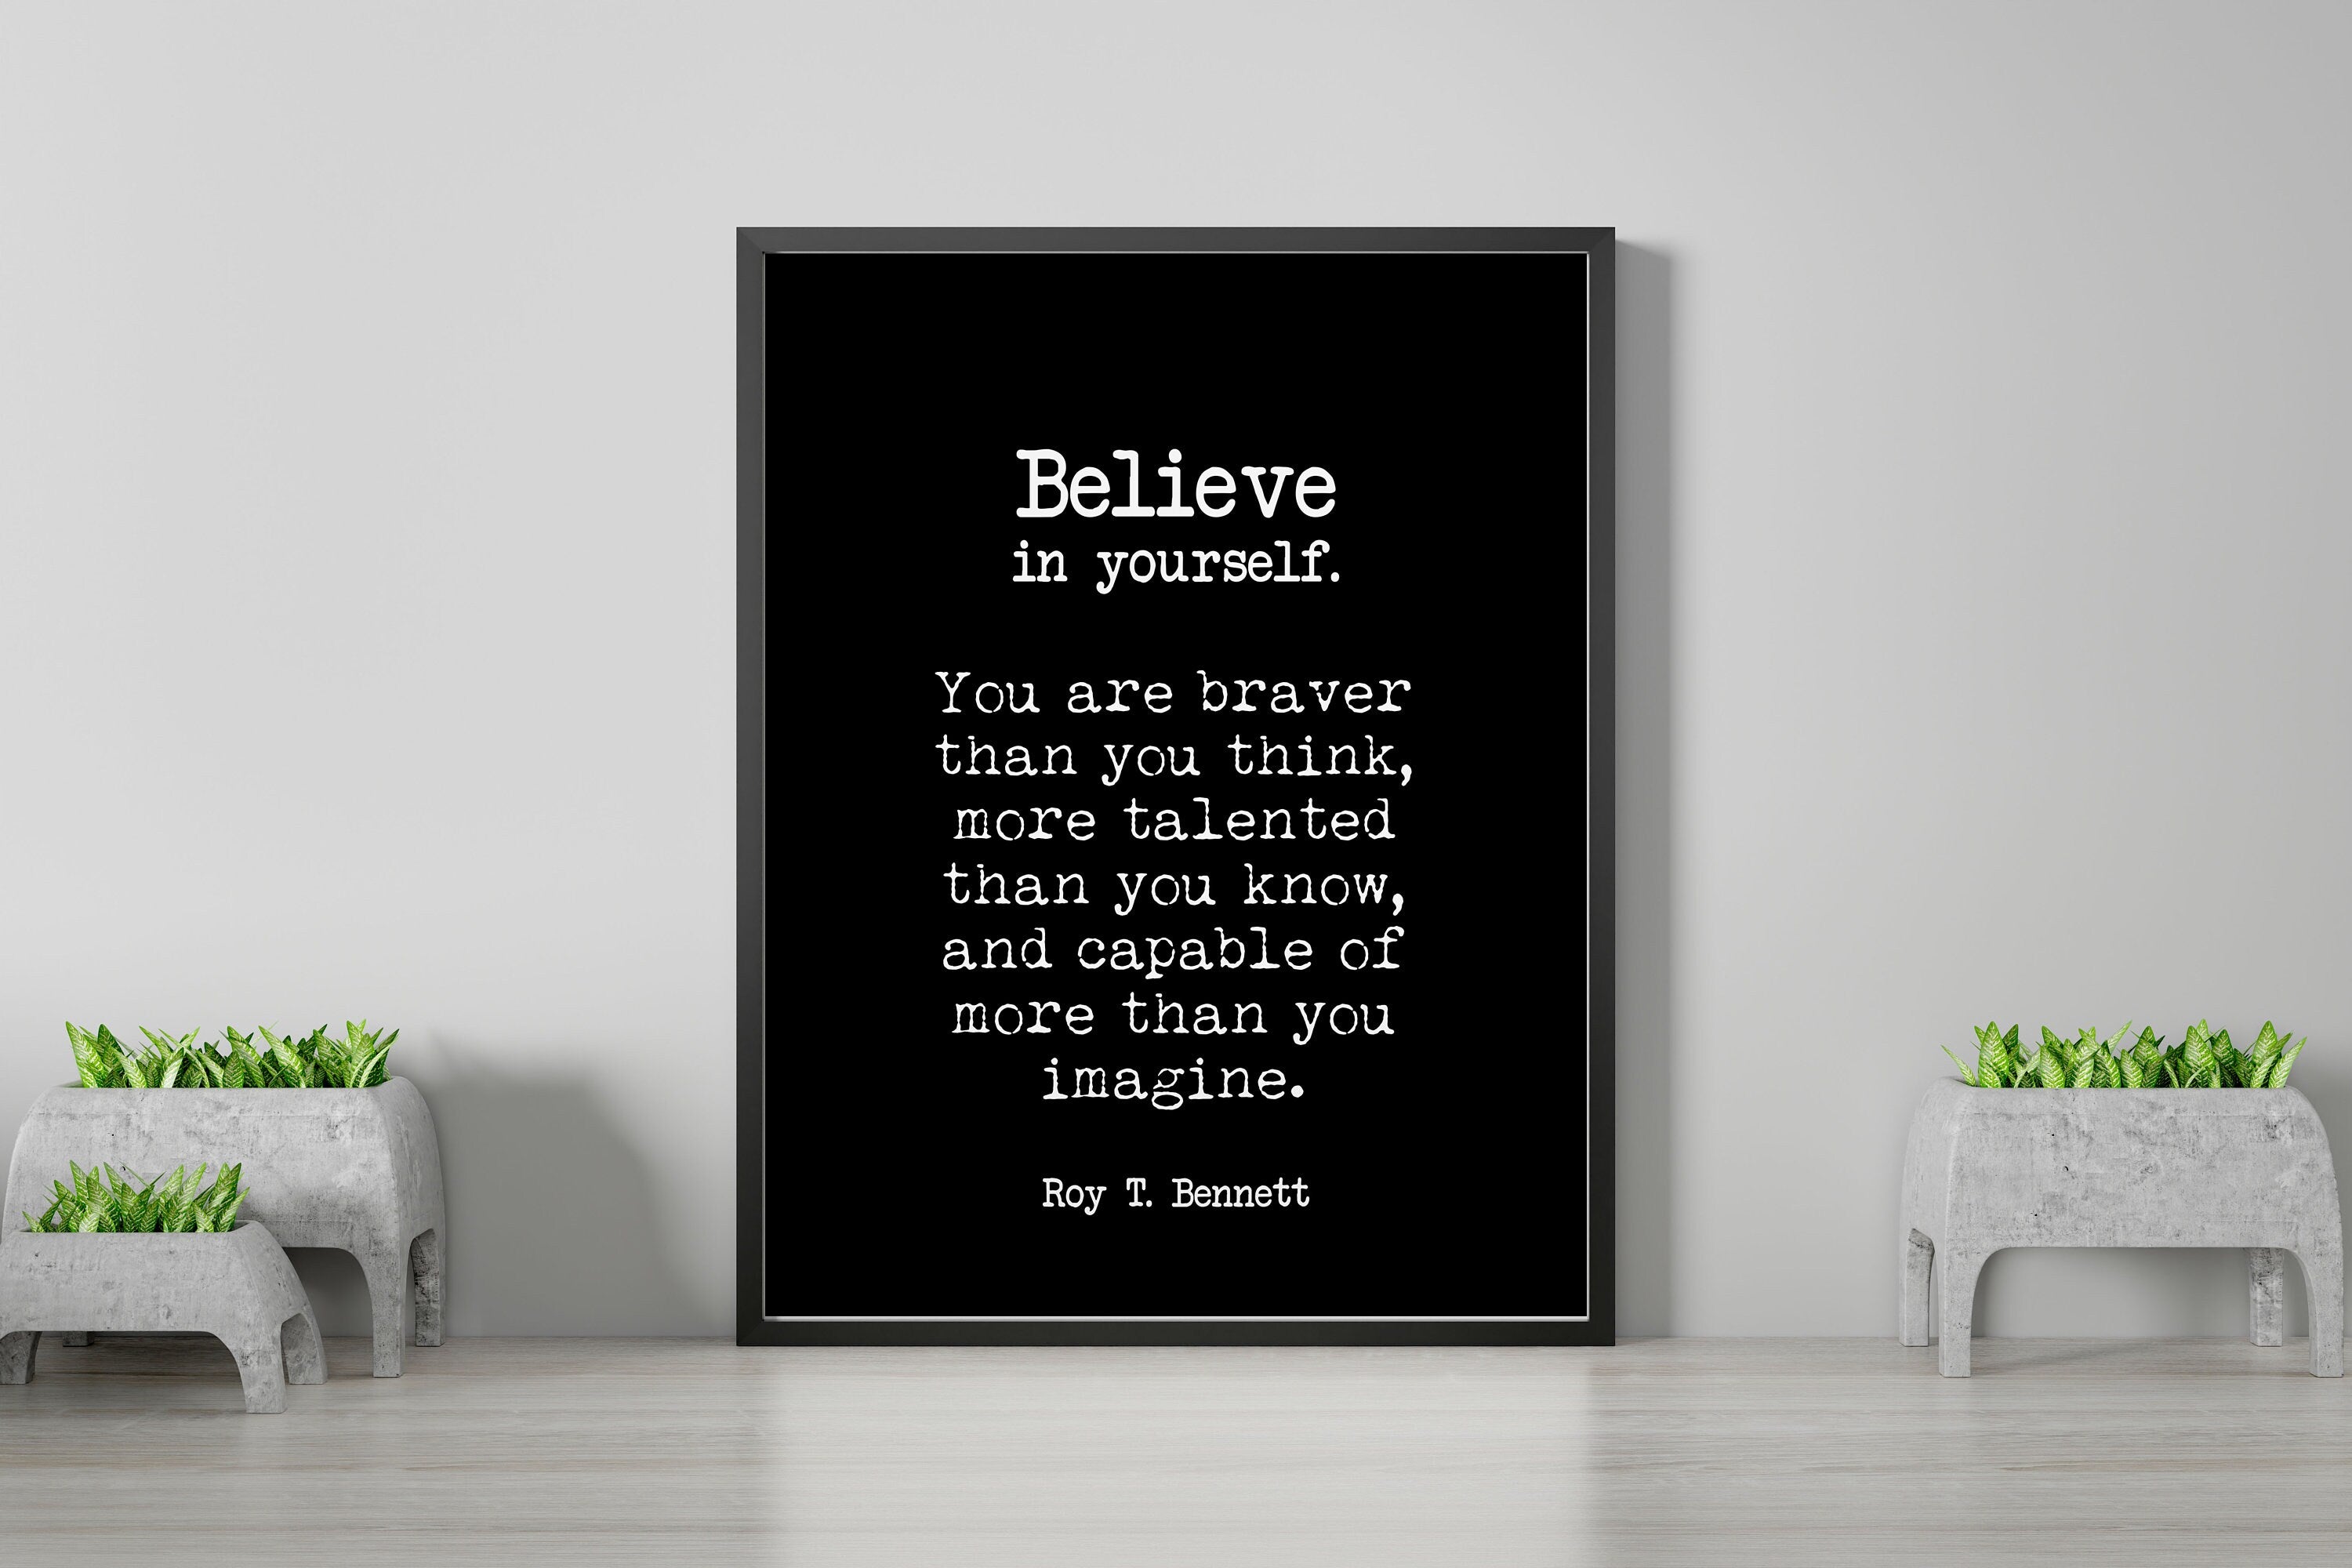 Roy T Bennett Quote Literary Art Print, Believe in Yourself Poster in Black & White and Vintage for Home Wall Decor, Framed or Unframed Art